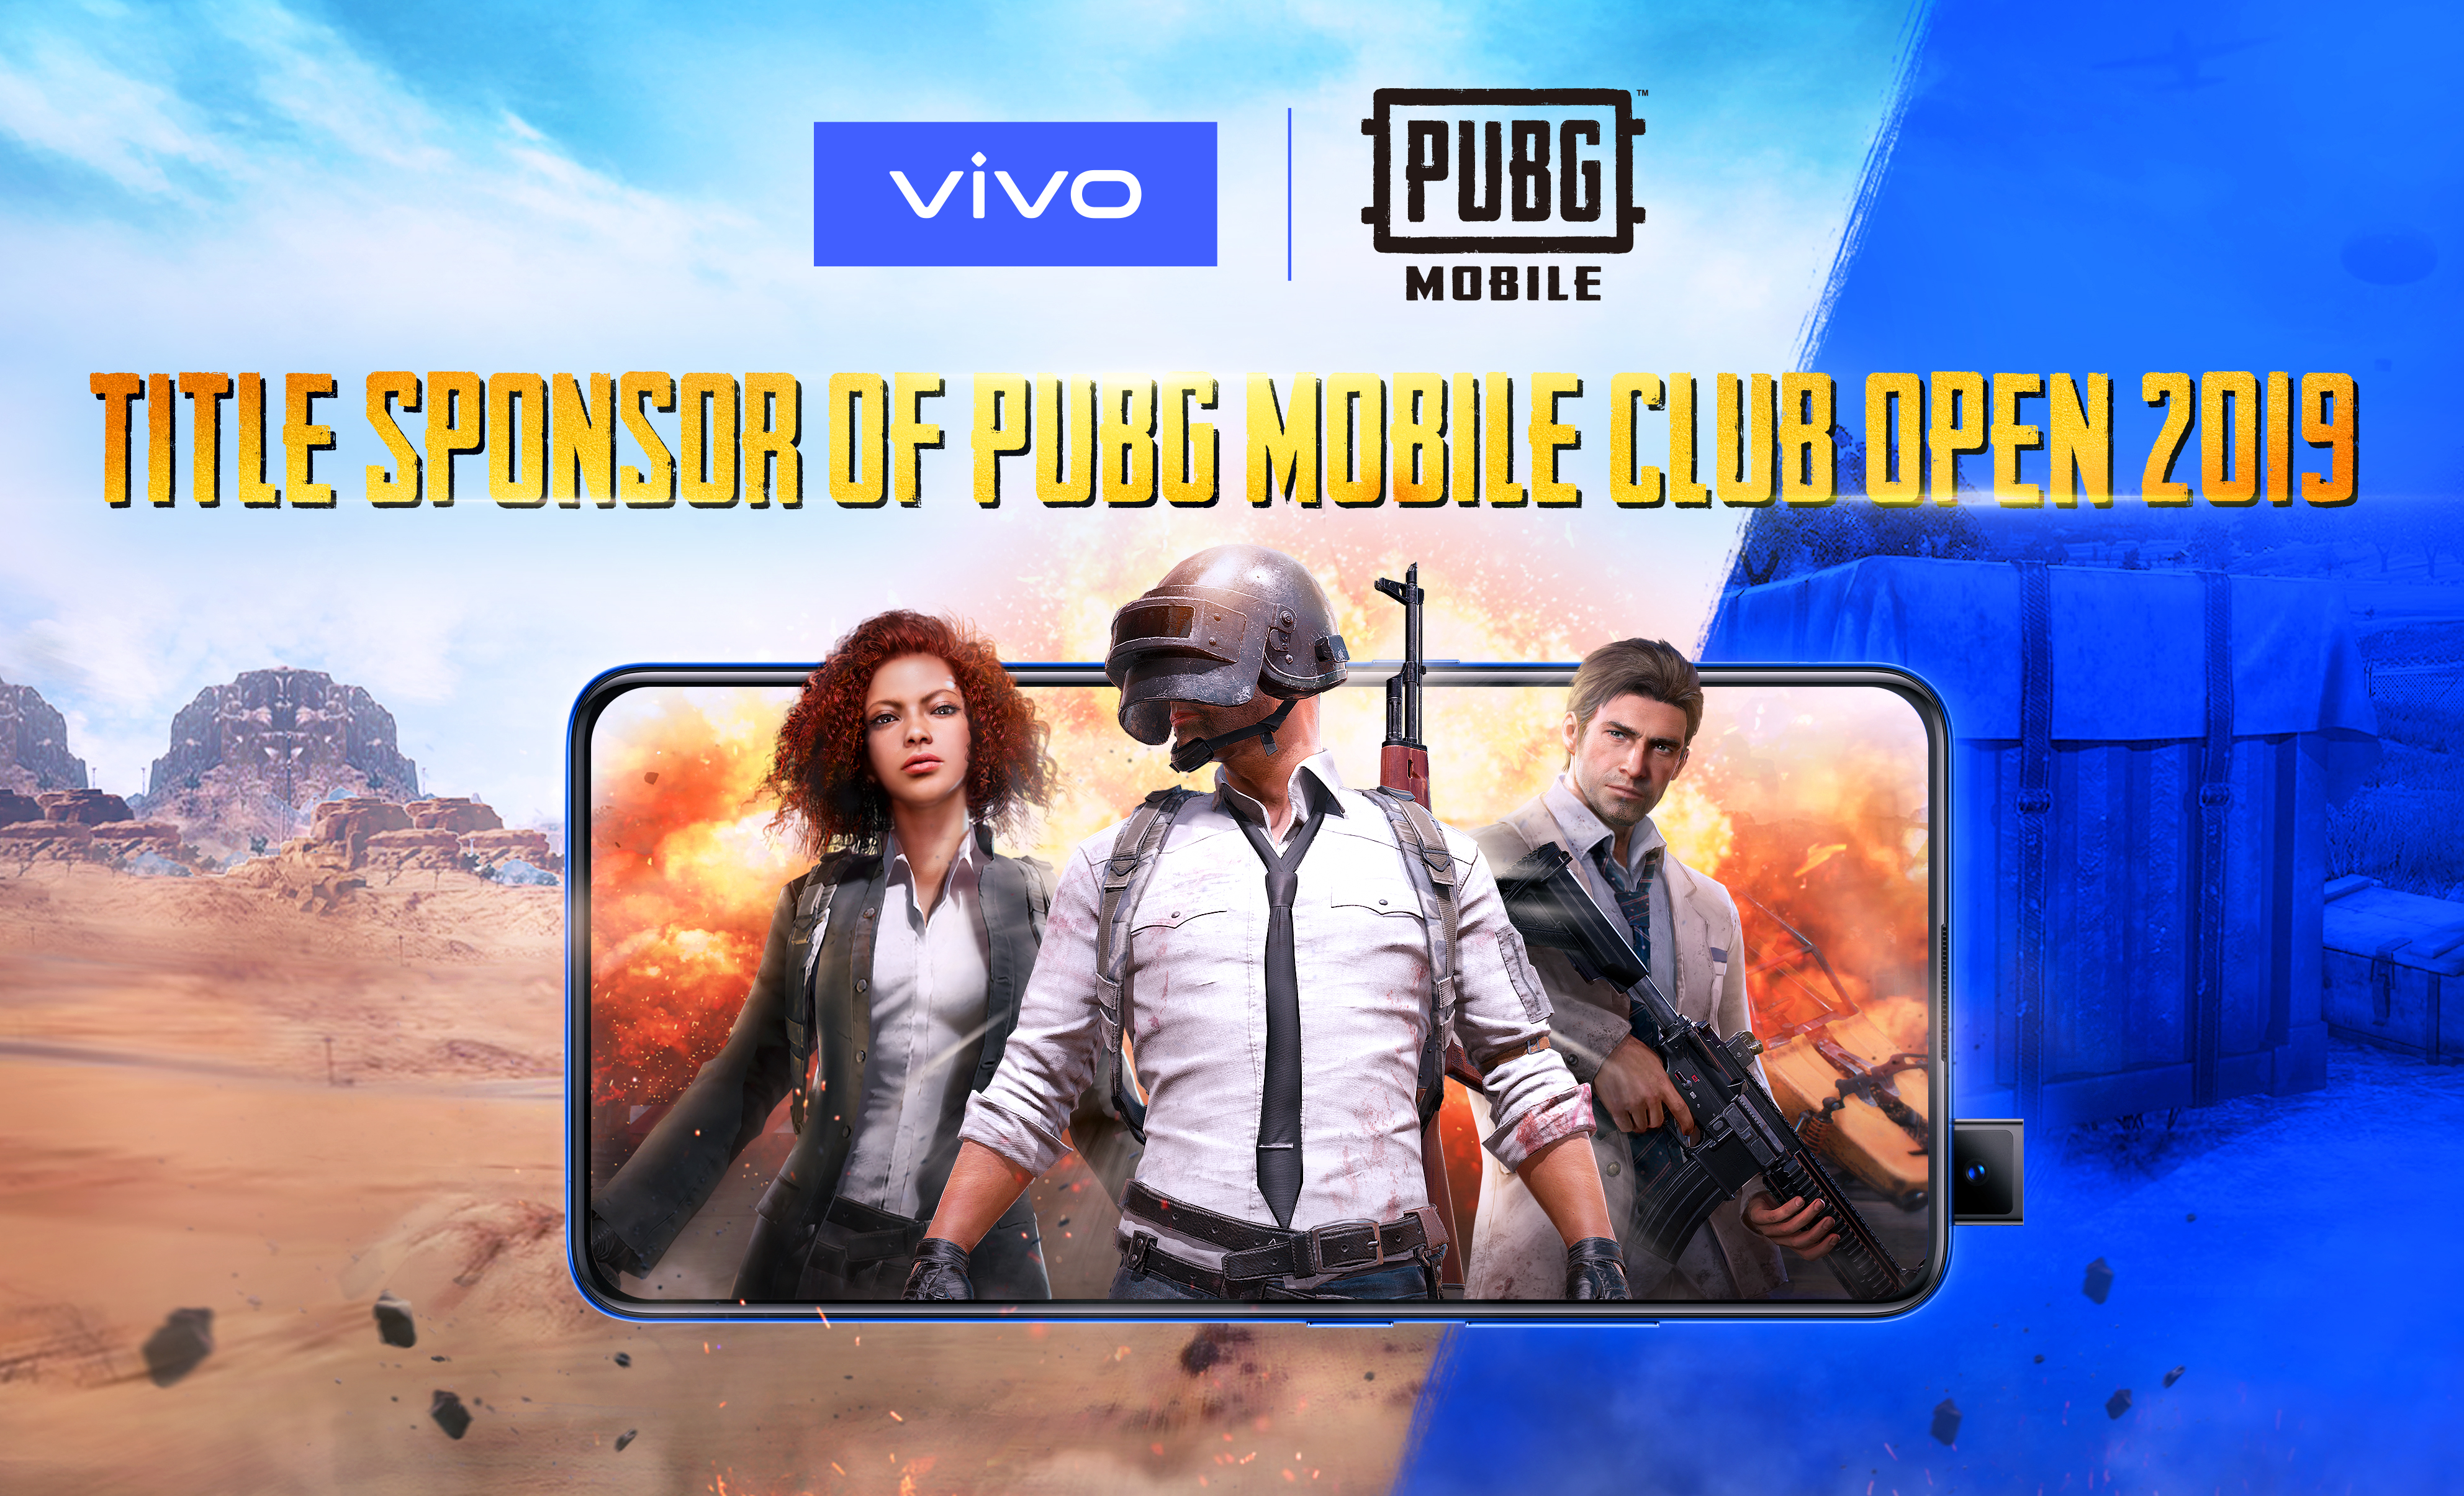 Vivo Becomes the Title Sponsor of PUBG MOBILE Club Open 2019